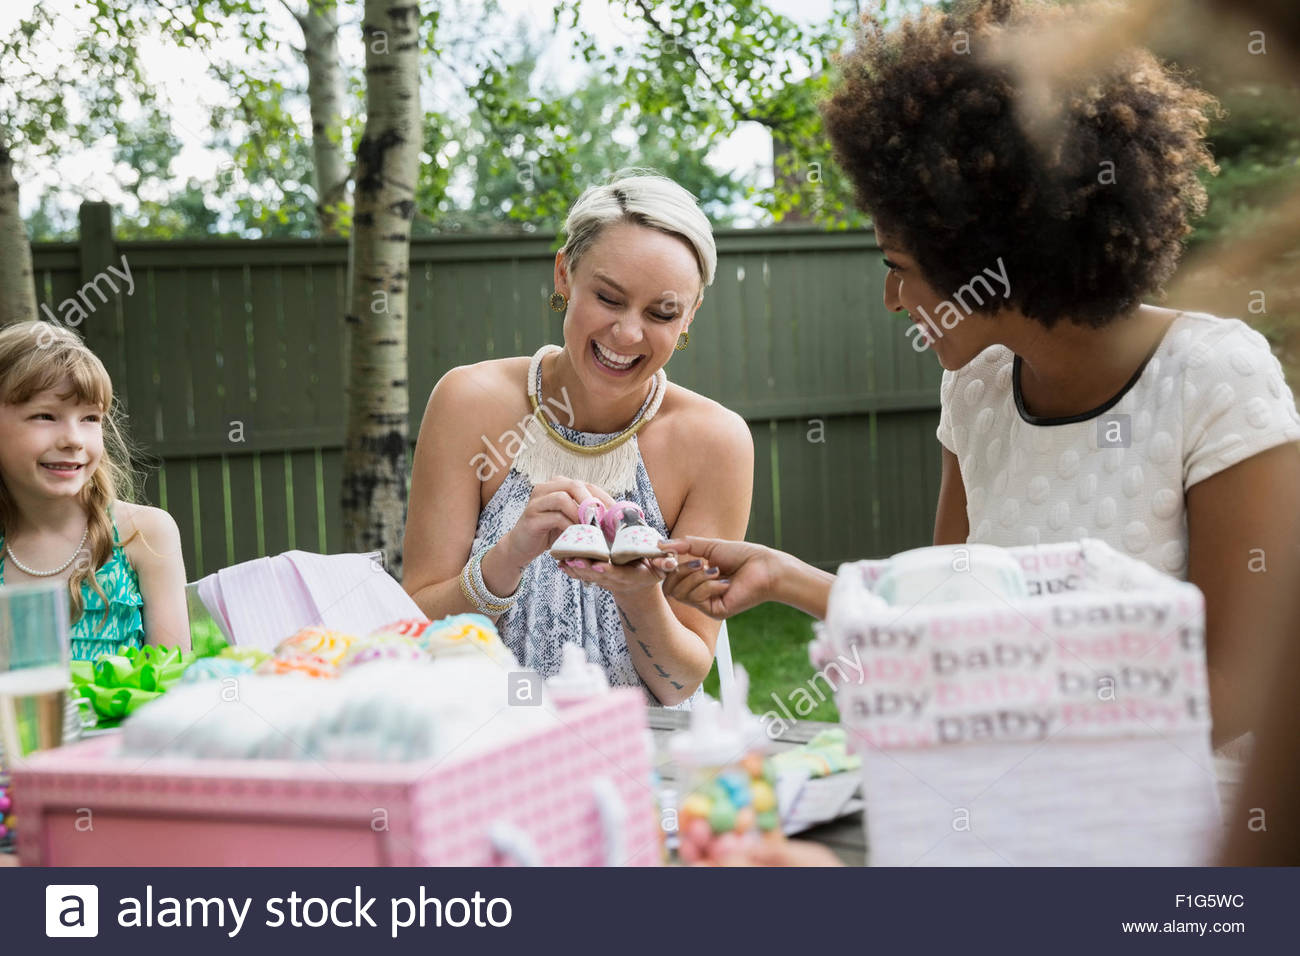 Women admiring tiny baby shoes at baby shower Stock Photo